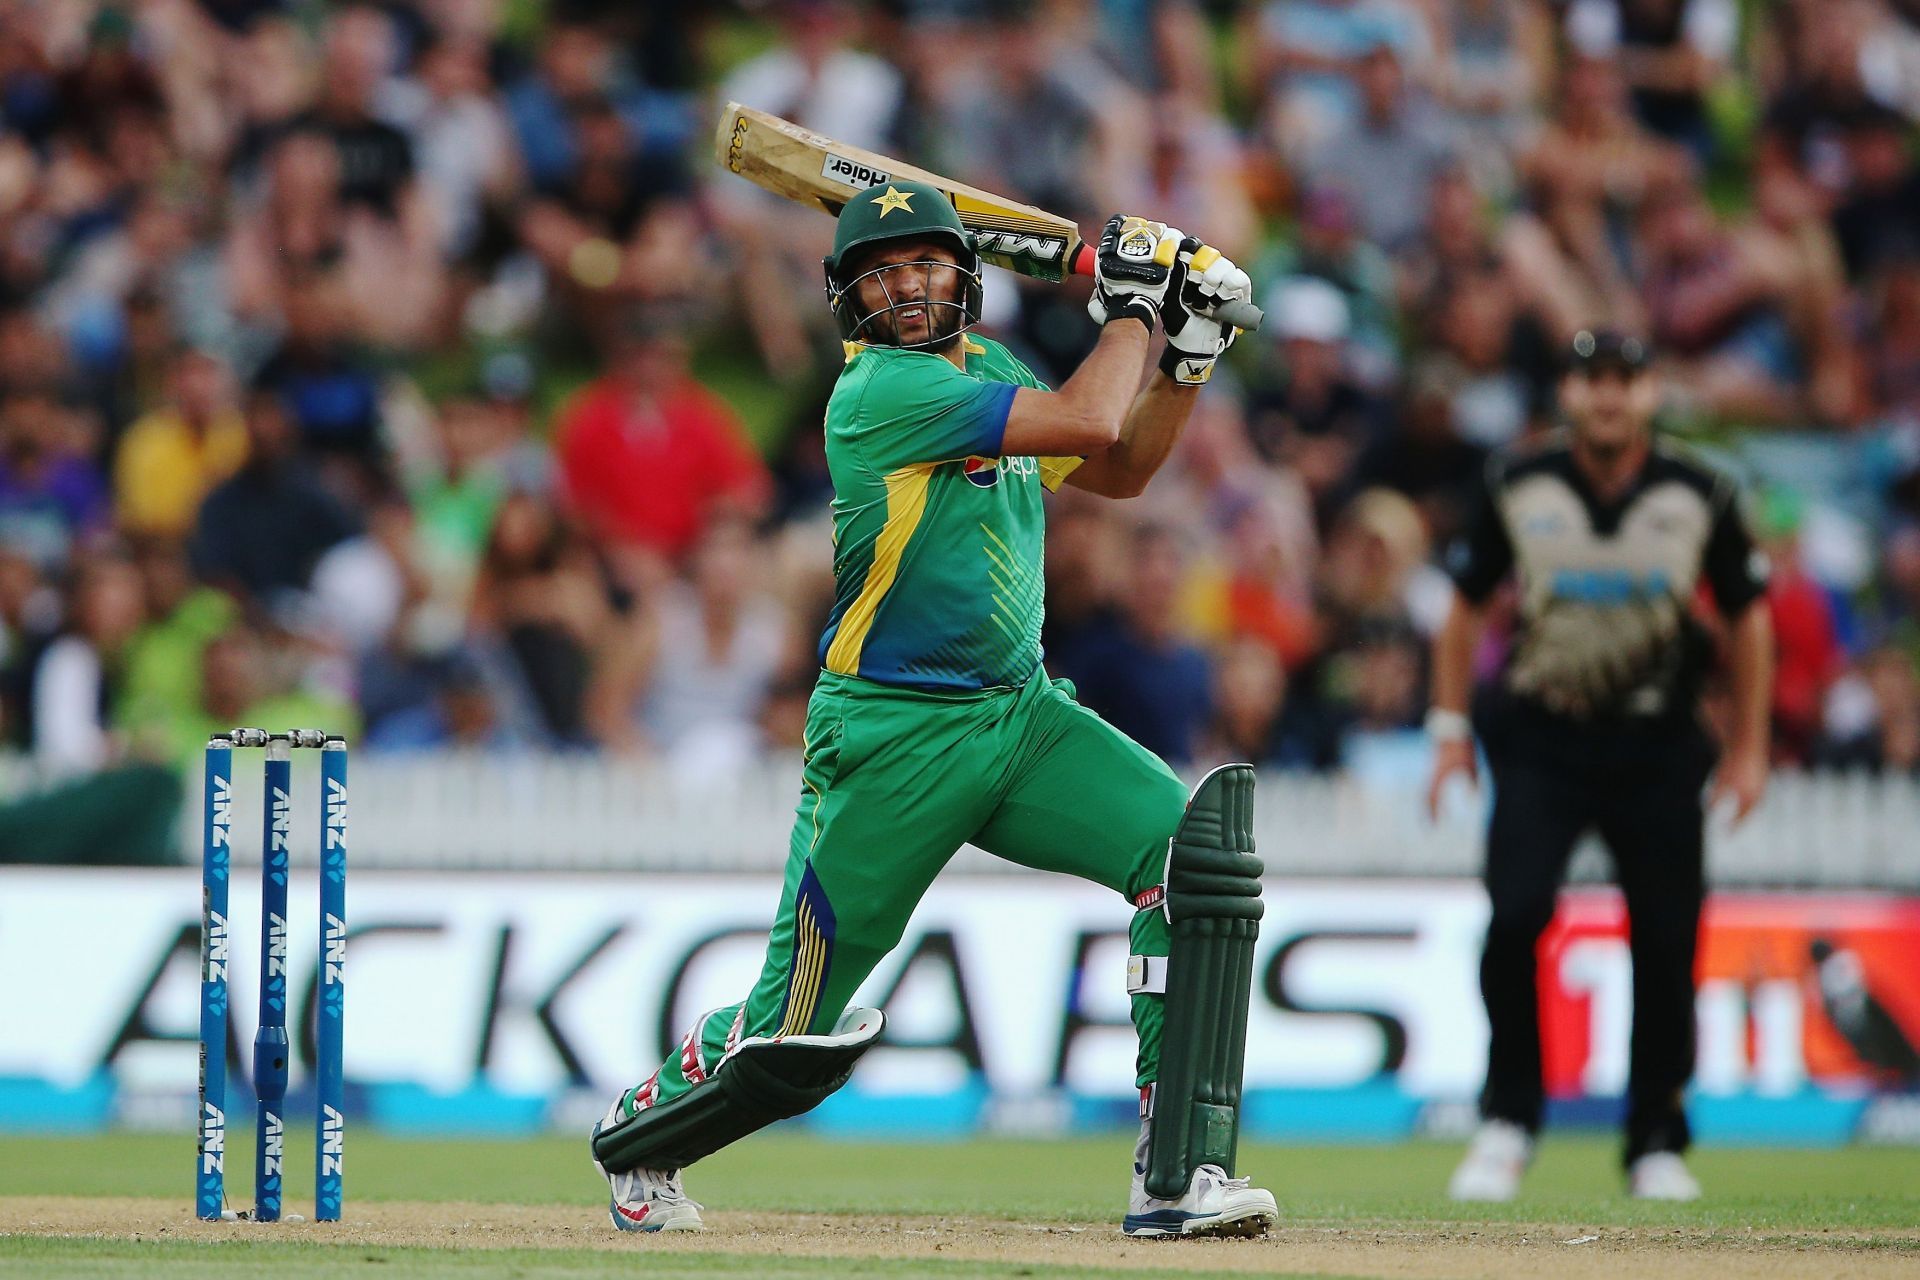 Shahid Afridi of Pakistan [Getty Images]